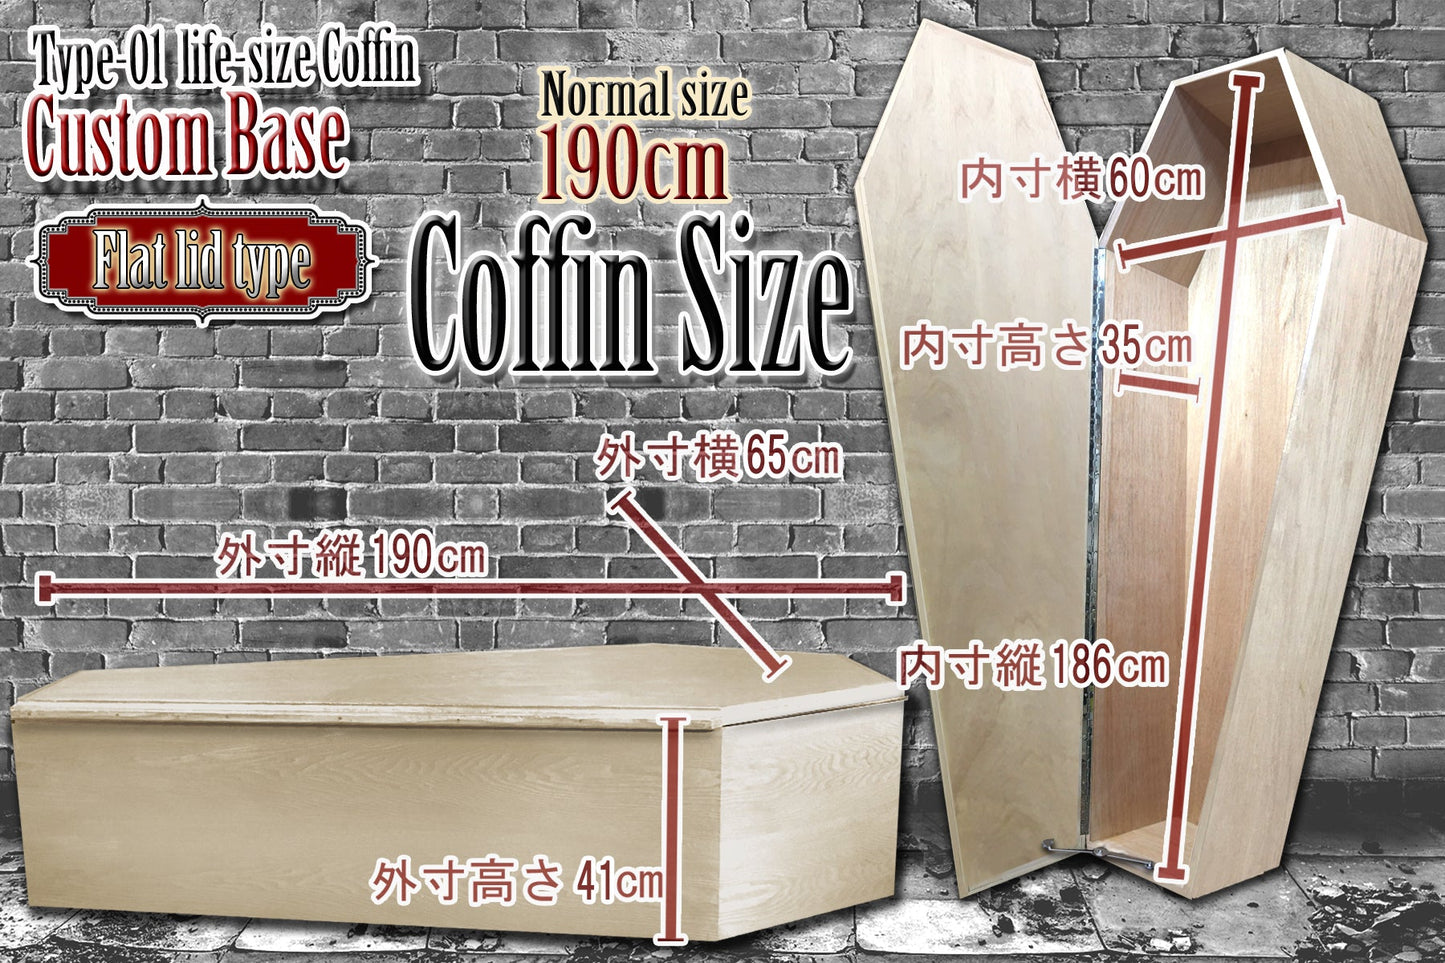 ✟Dream Pack✟【Type-01】1/1Scale 等身大棺  Life-size Coffin ＜ Ghost Bride  Coffin / SILVER type ＞